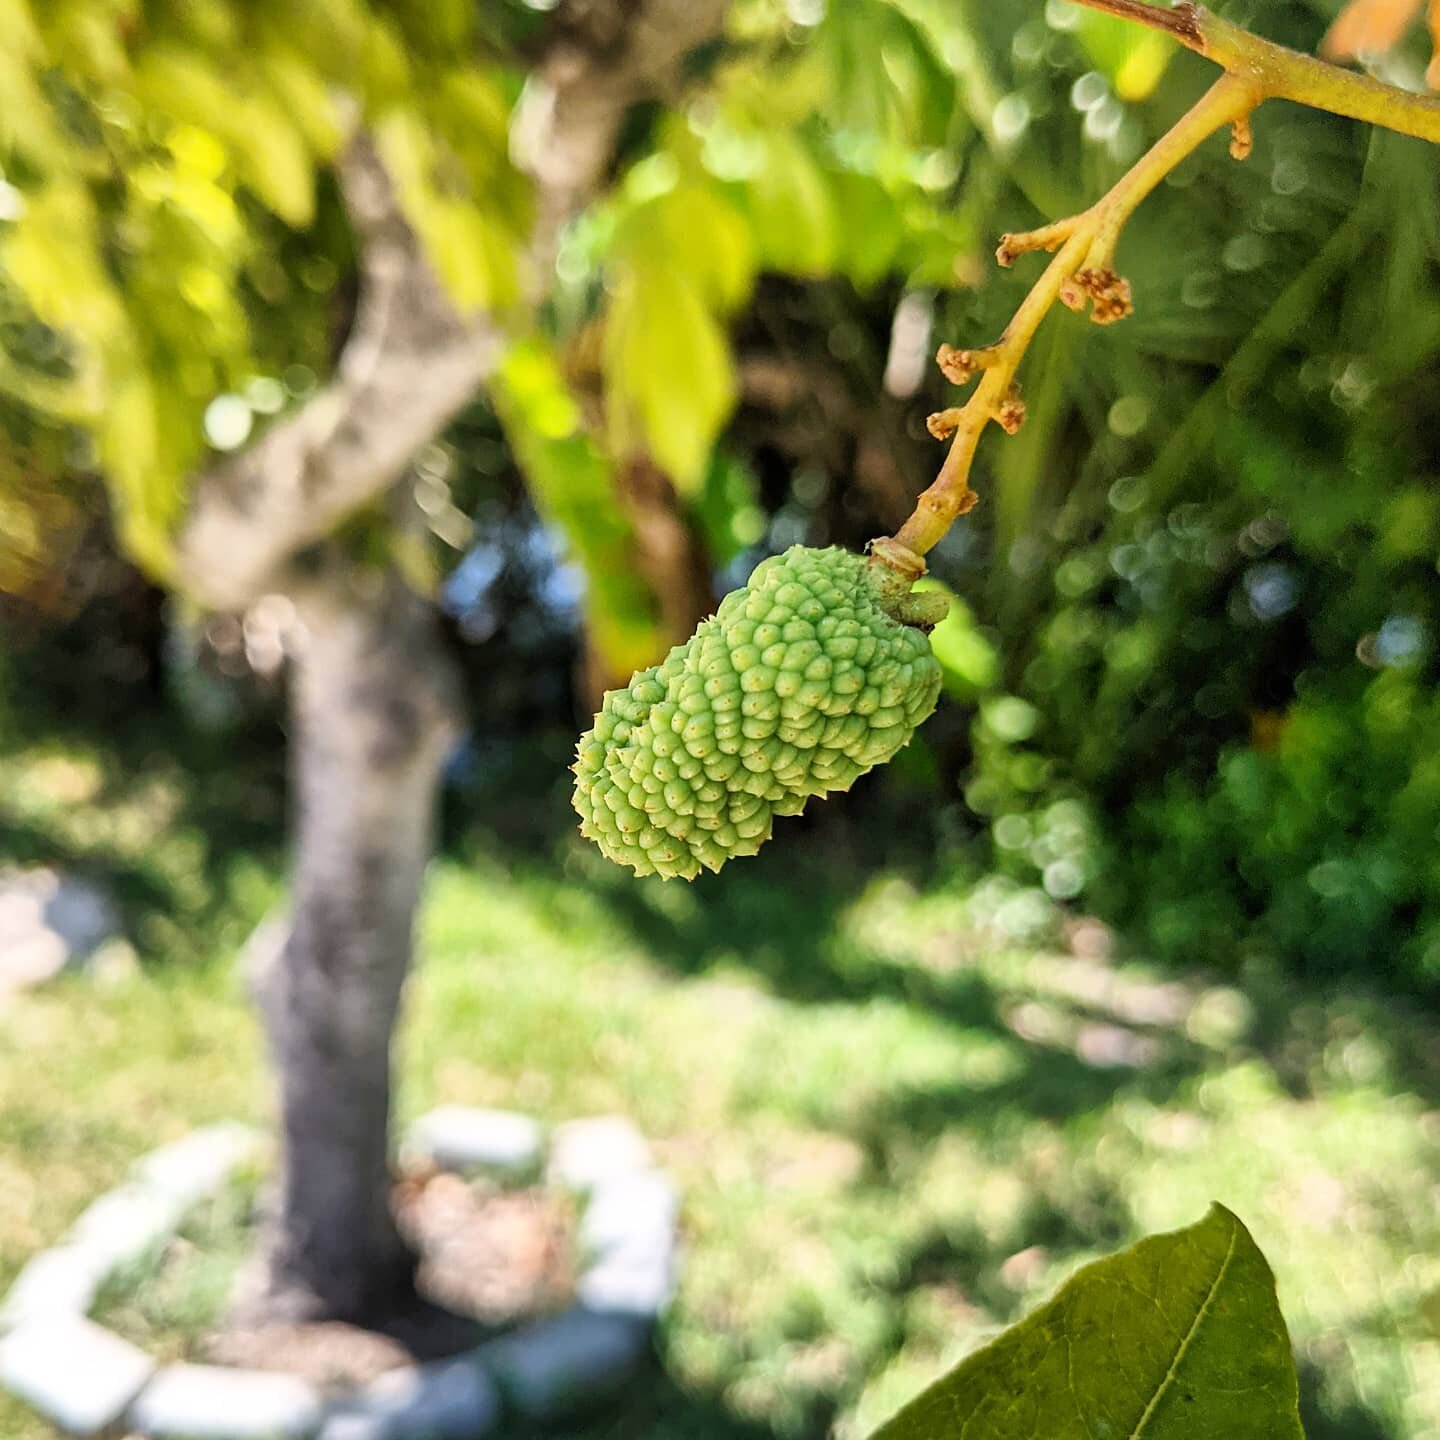 Baby lychee growing finally! This tree was dying when I first bought the island. Happy to see after some TLC for a while it's now fruiting! 😋